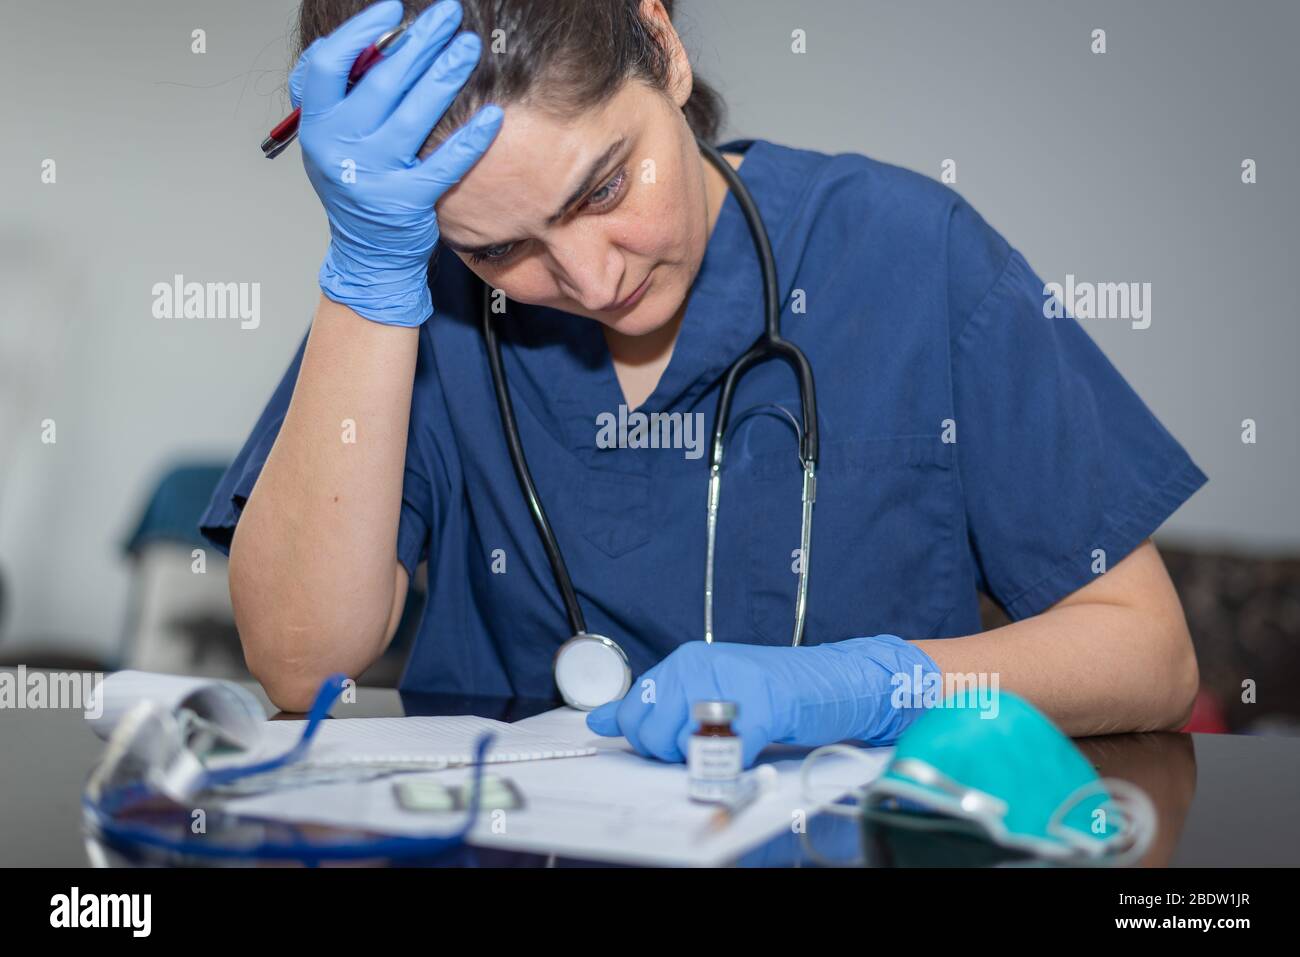 Overworked frustrated doctor in his office during covid-19 pandemic Stock Photo